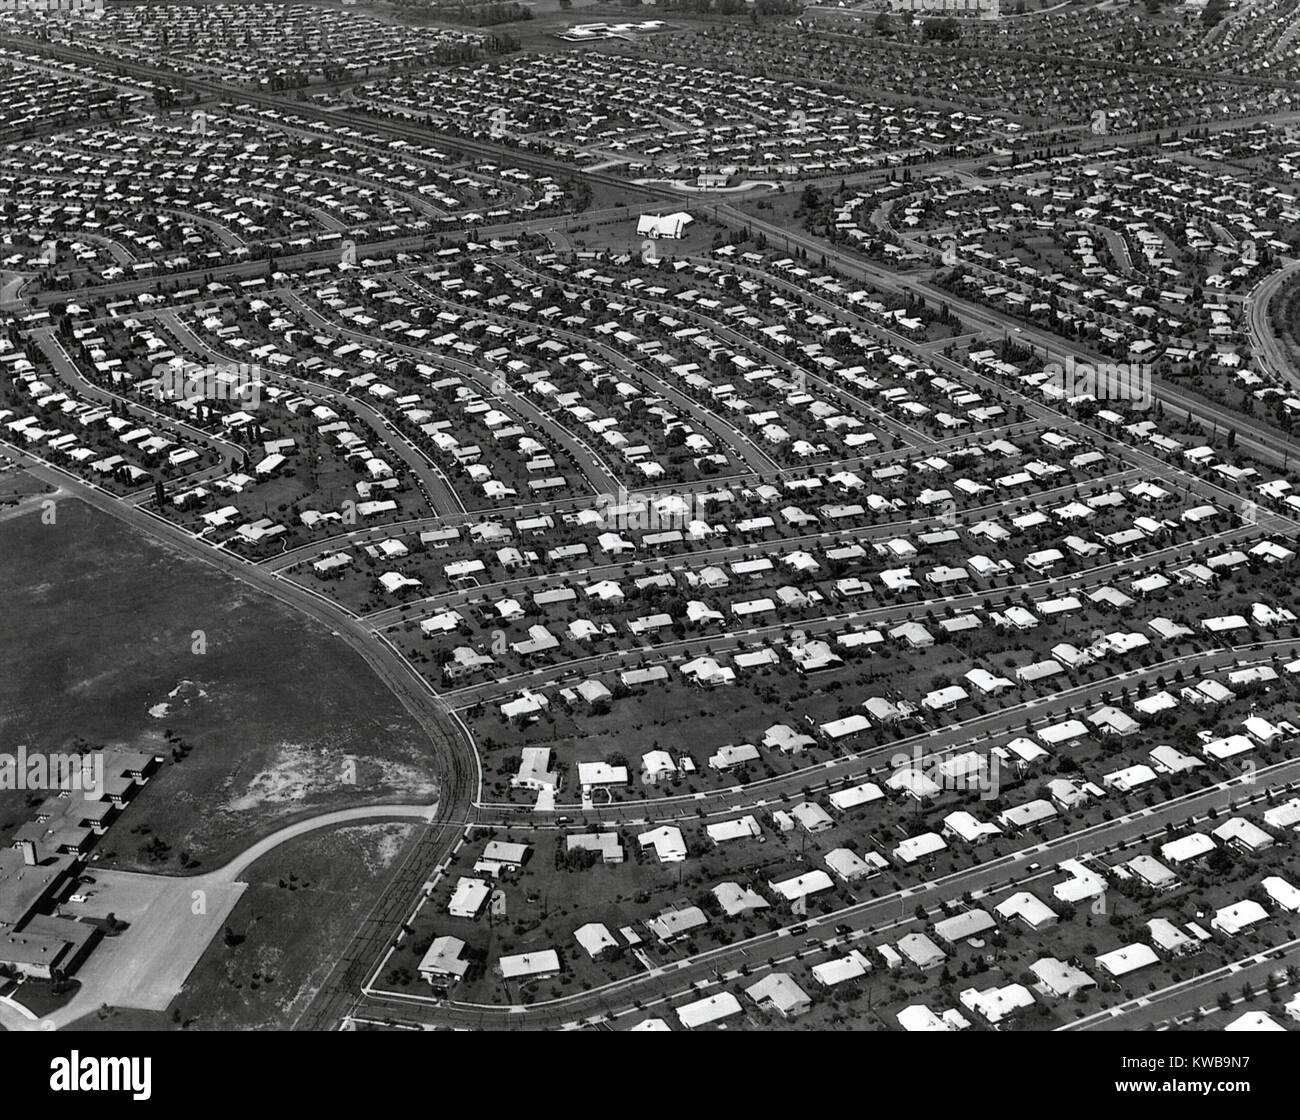 An Aerial view of the Levittown housing project in Pennsylvania. It was located in the eastern part of the State, in the Delaware River Valley. Photo by Ed Latcham. (BSLOC 2014 13 145) Stock Photo